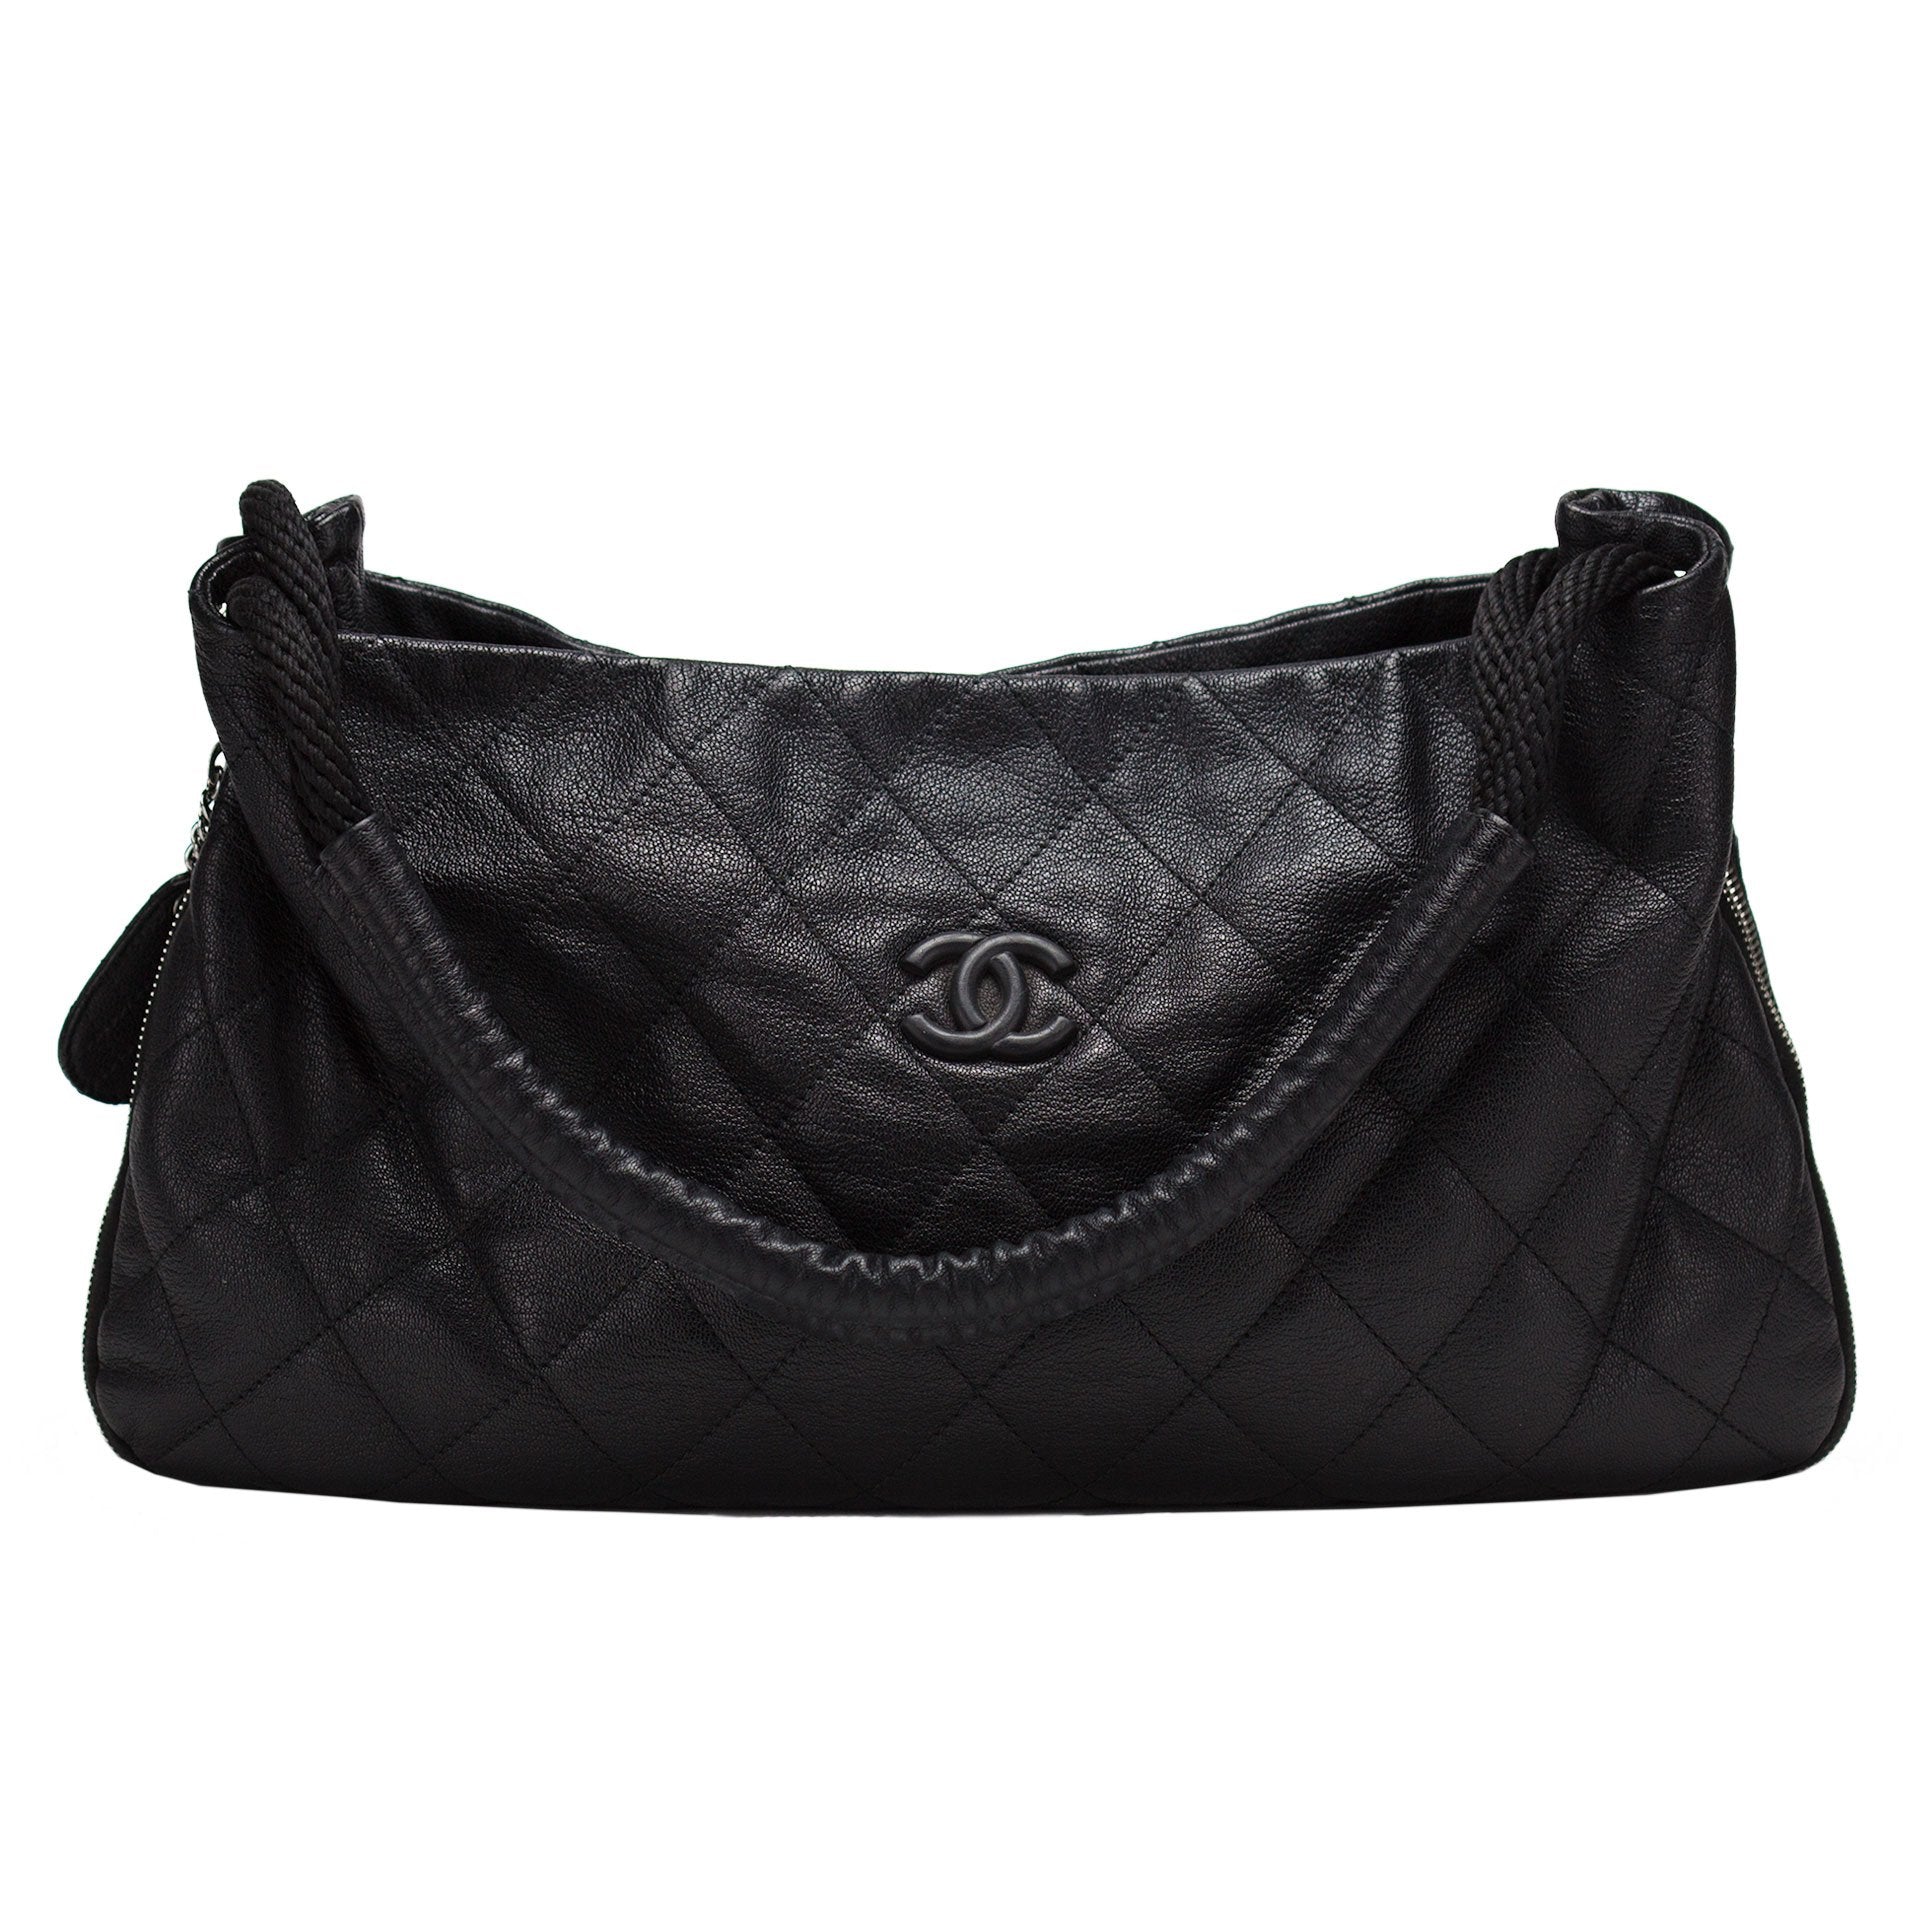 Snag the Latest CHANEL Classic Bags & Handbags for Women with Fast